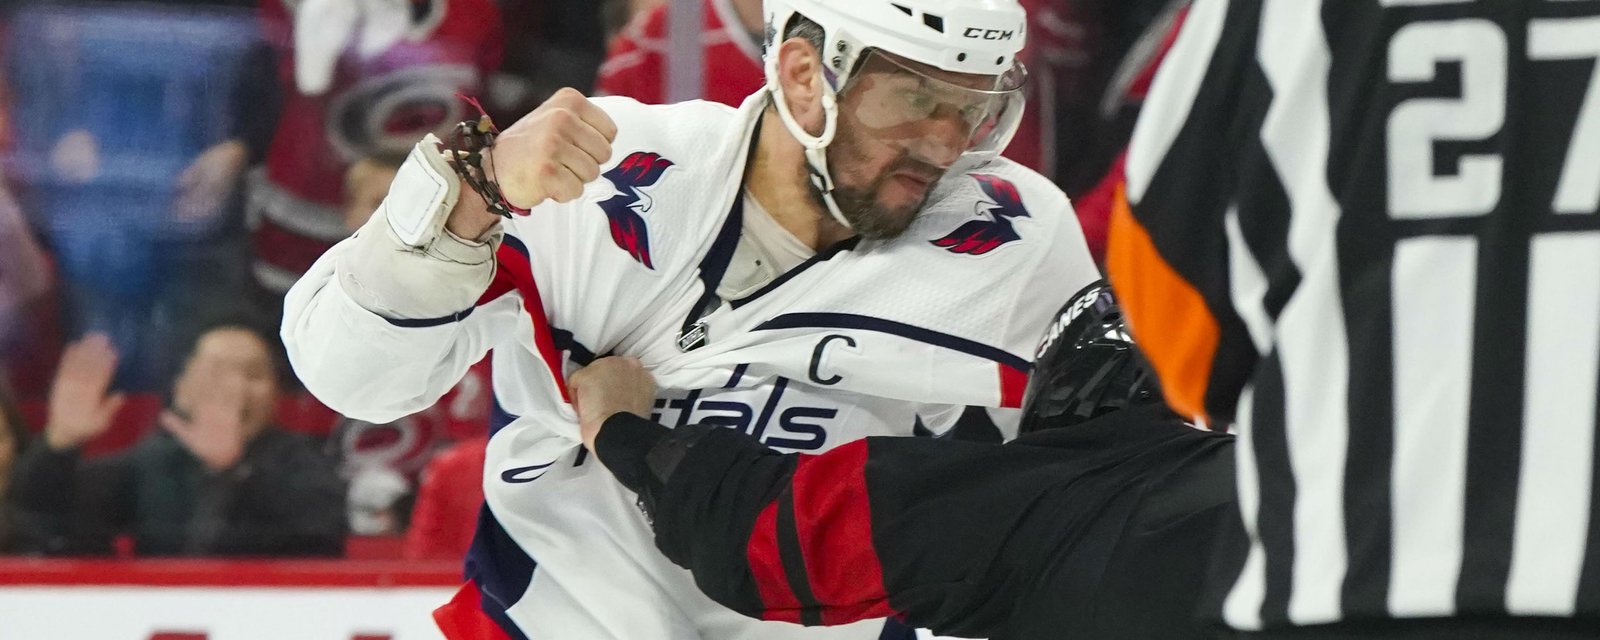 Ovechkin takes another shot at Svechnikov weeks after KOing him!